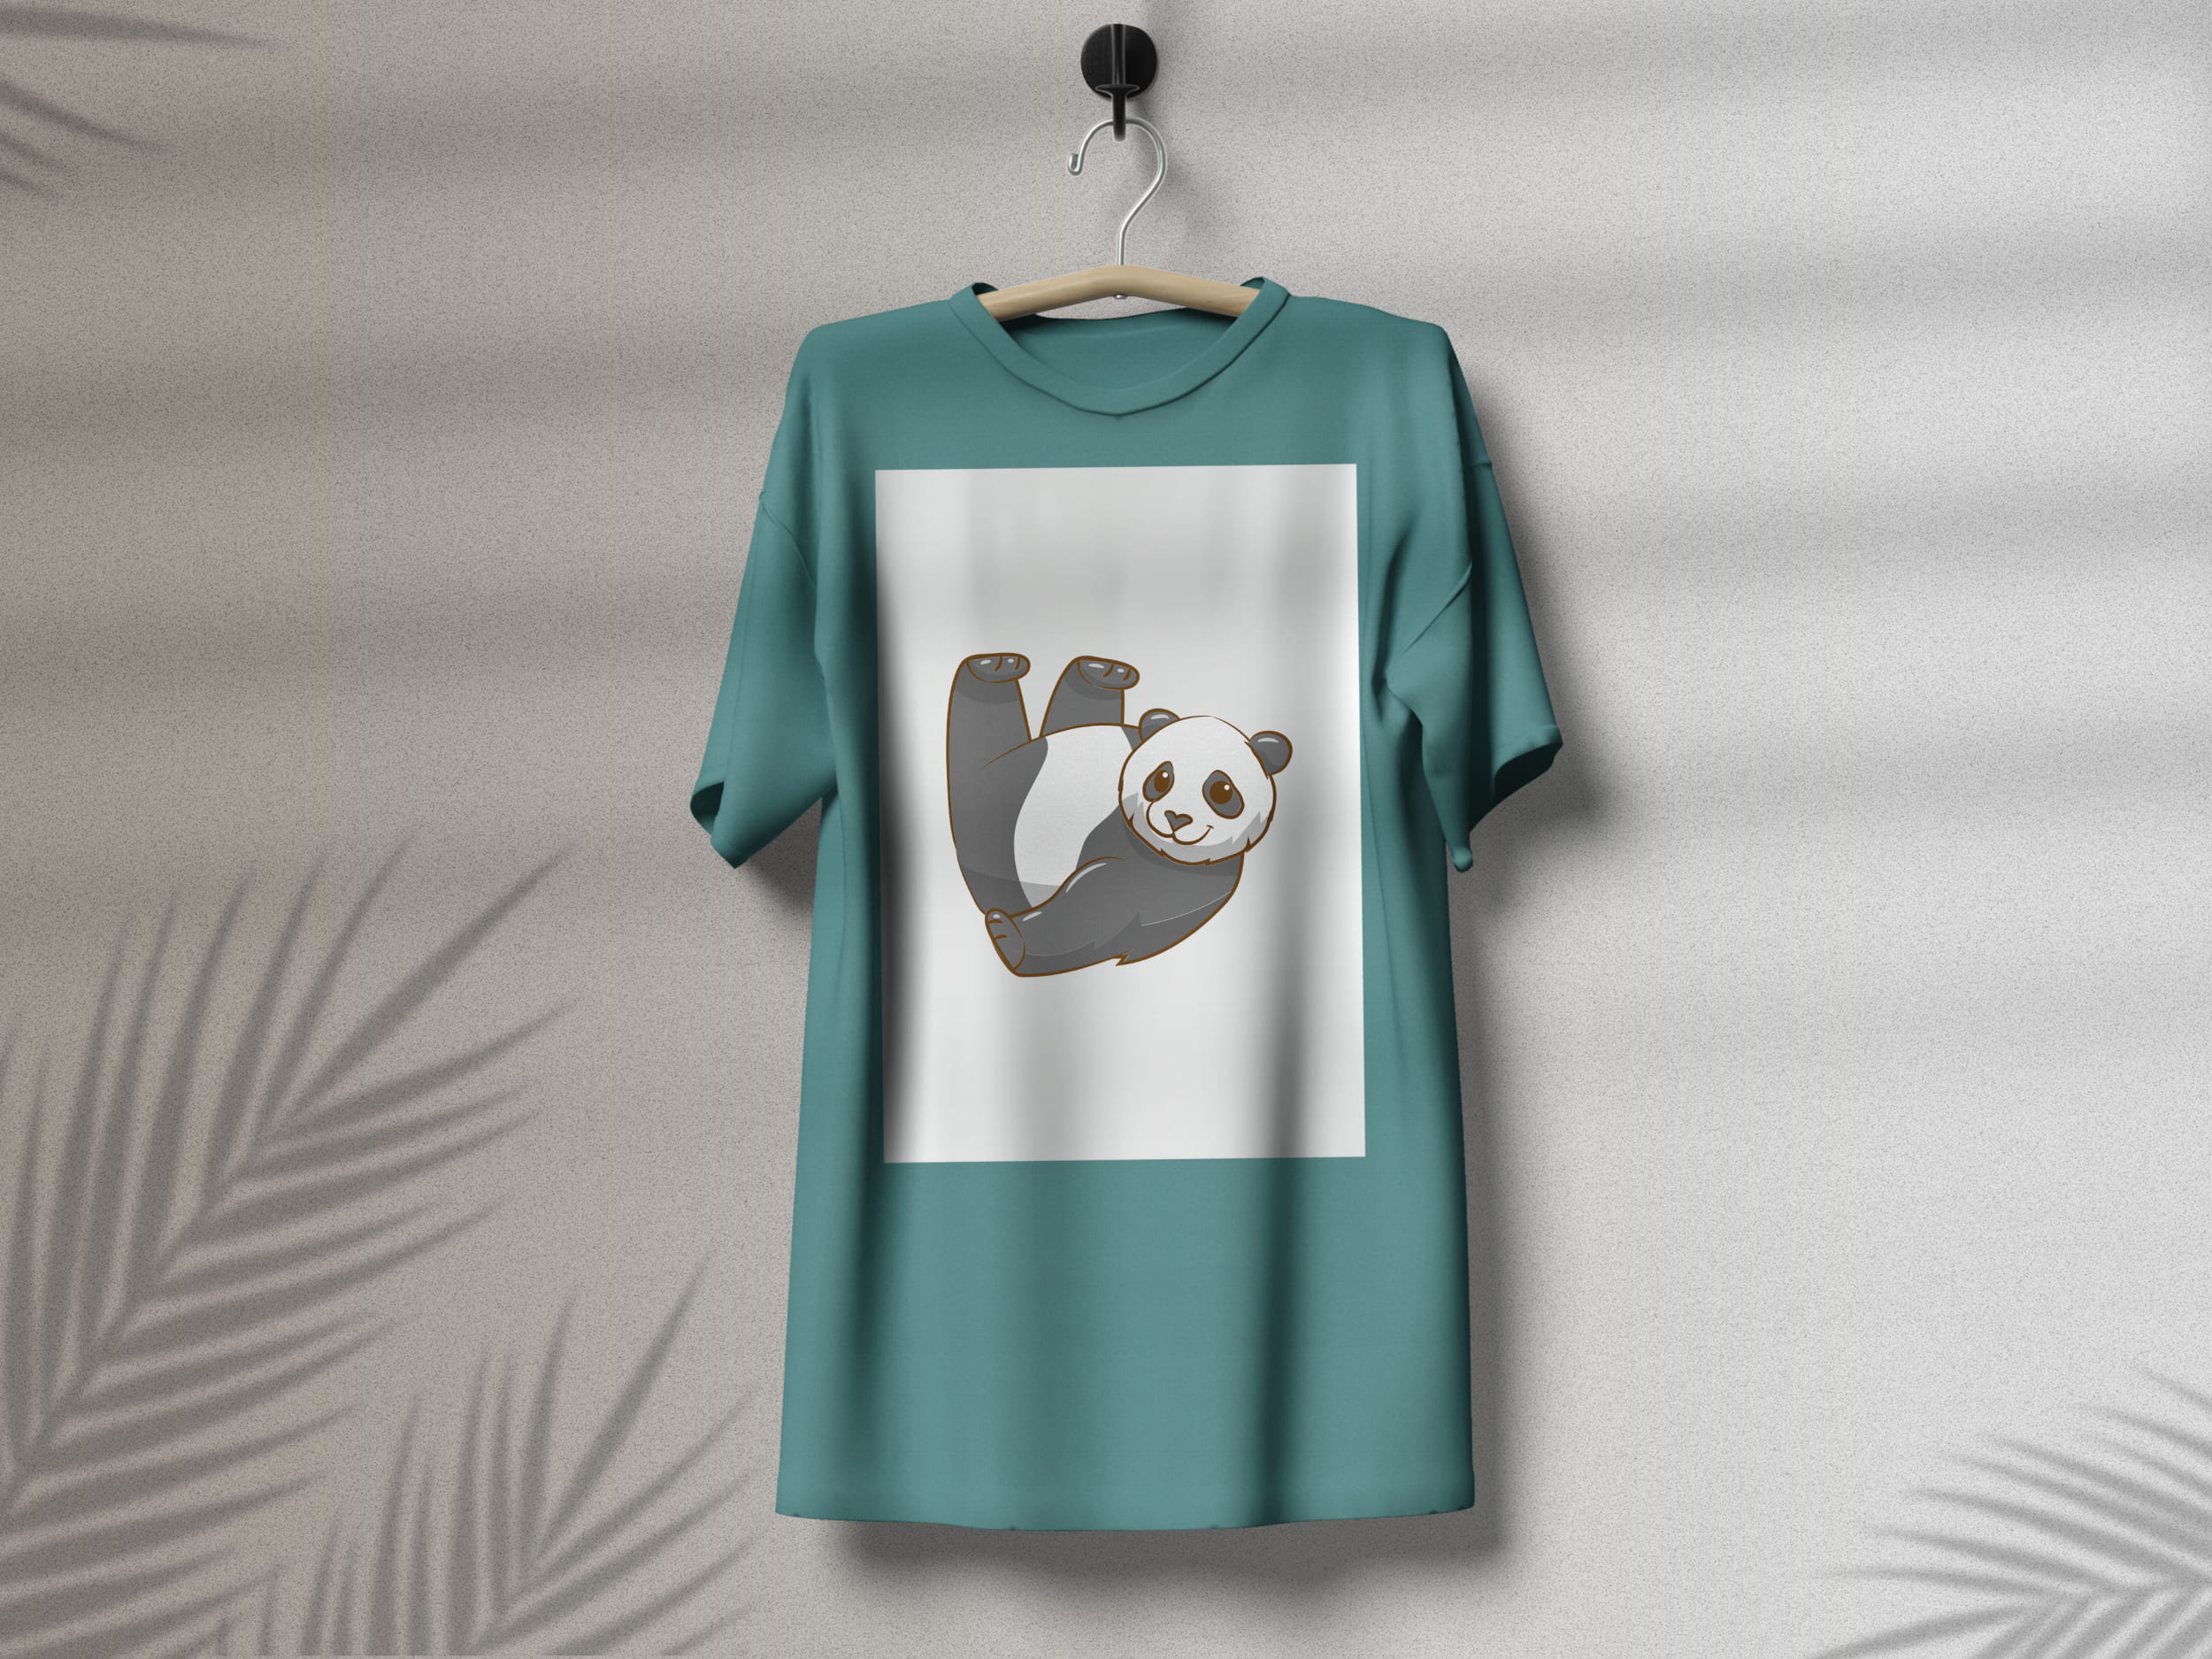 Turquoise t-shirt with a cute panda on a white background, on a hanger on a gray background